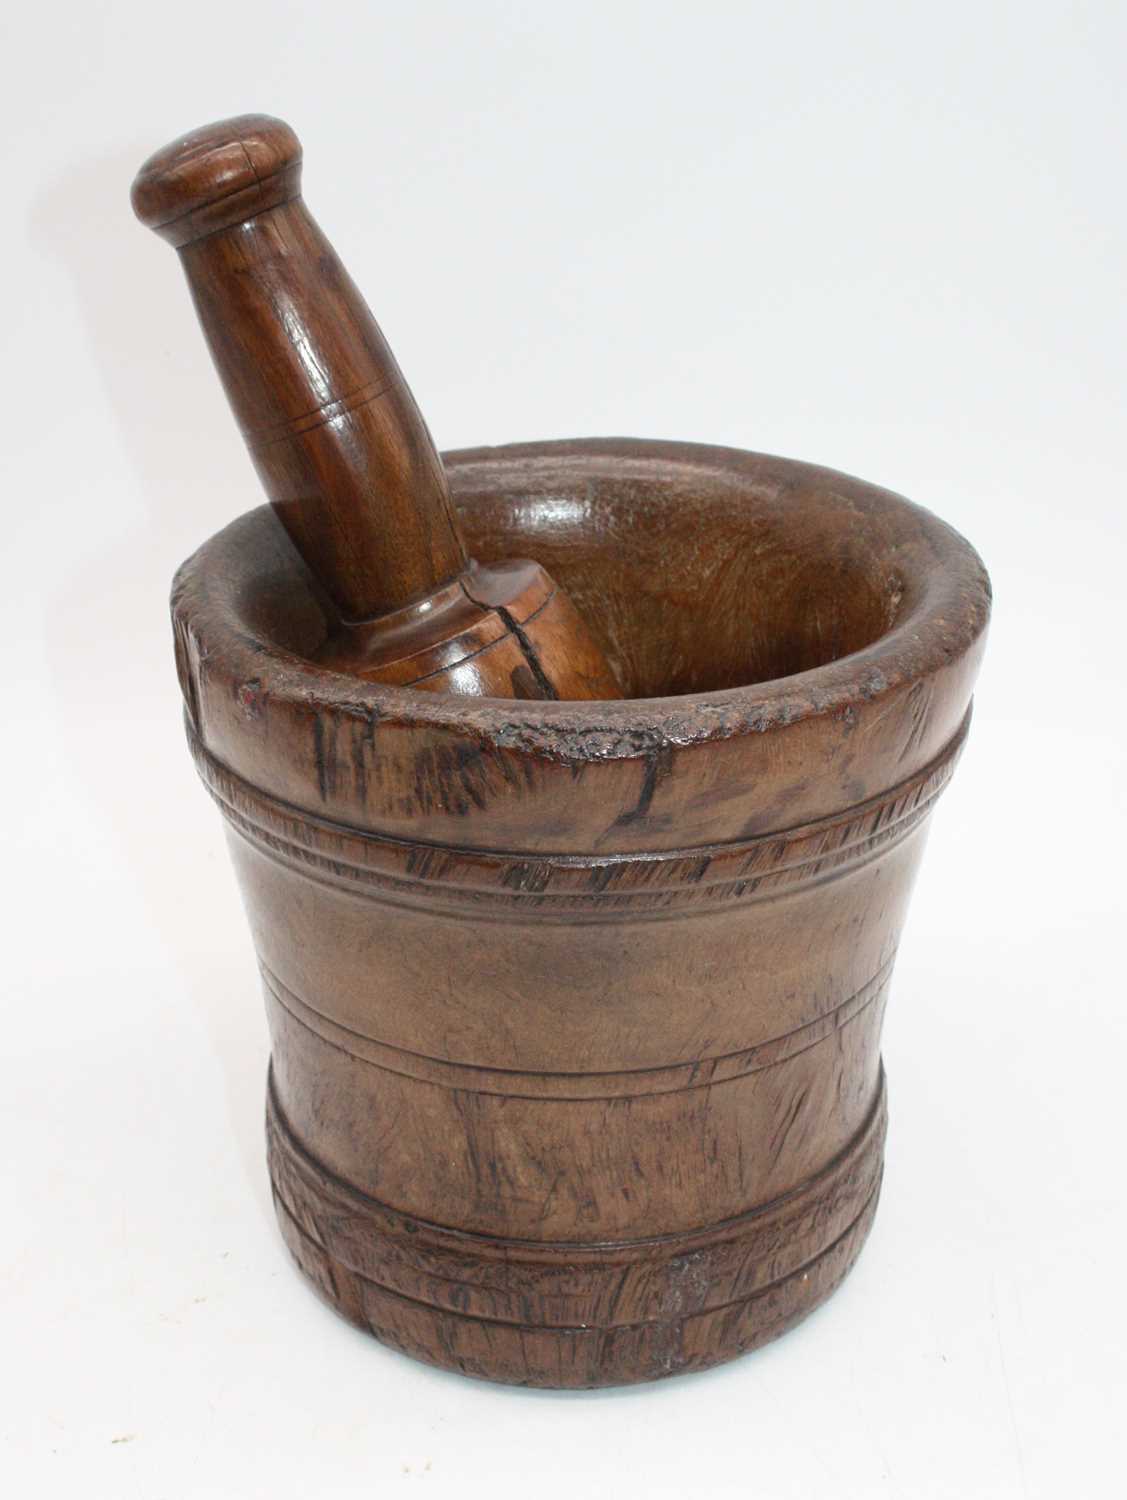 A turned sycamore pestle and mortar, the mortar h.17cm